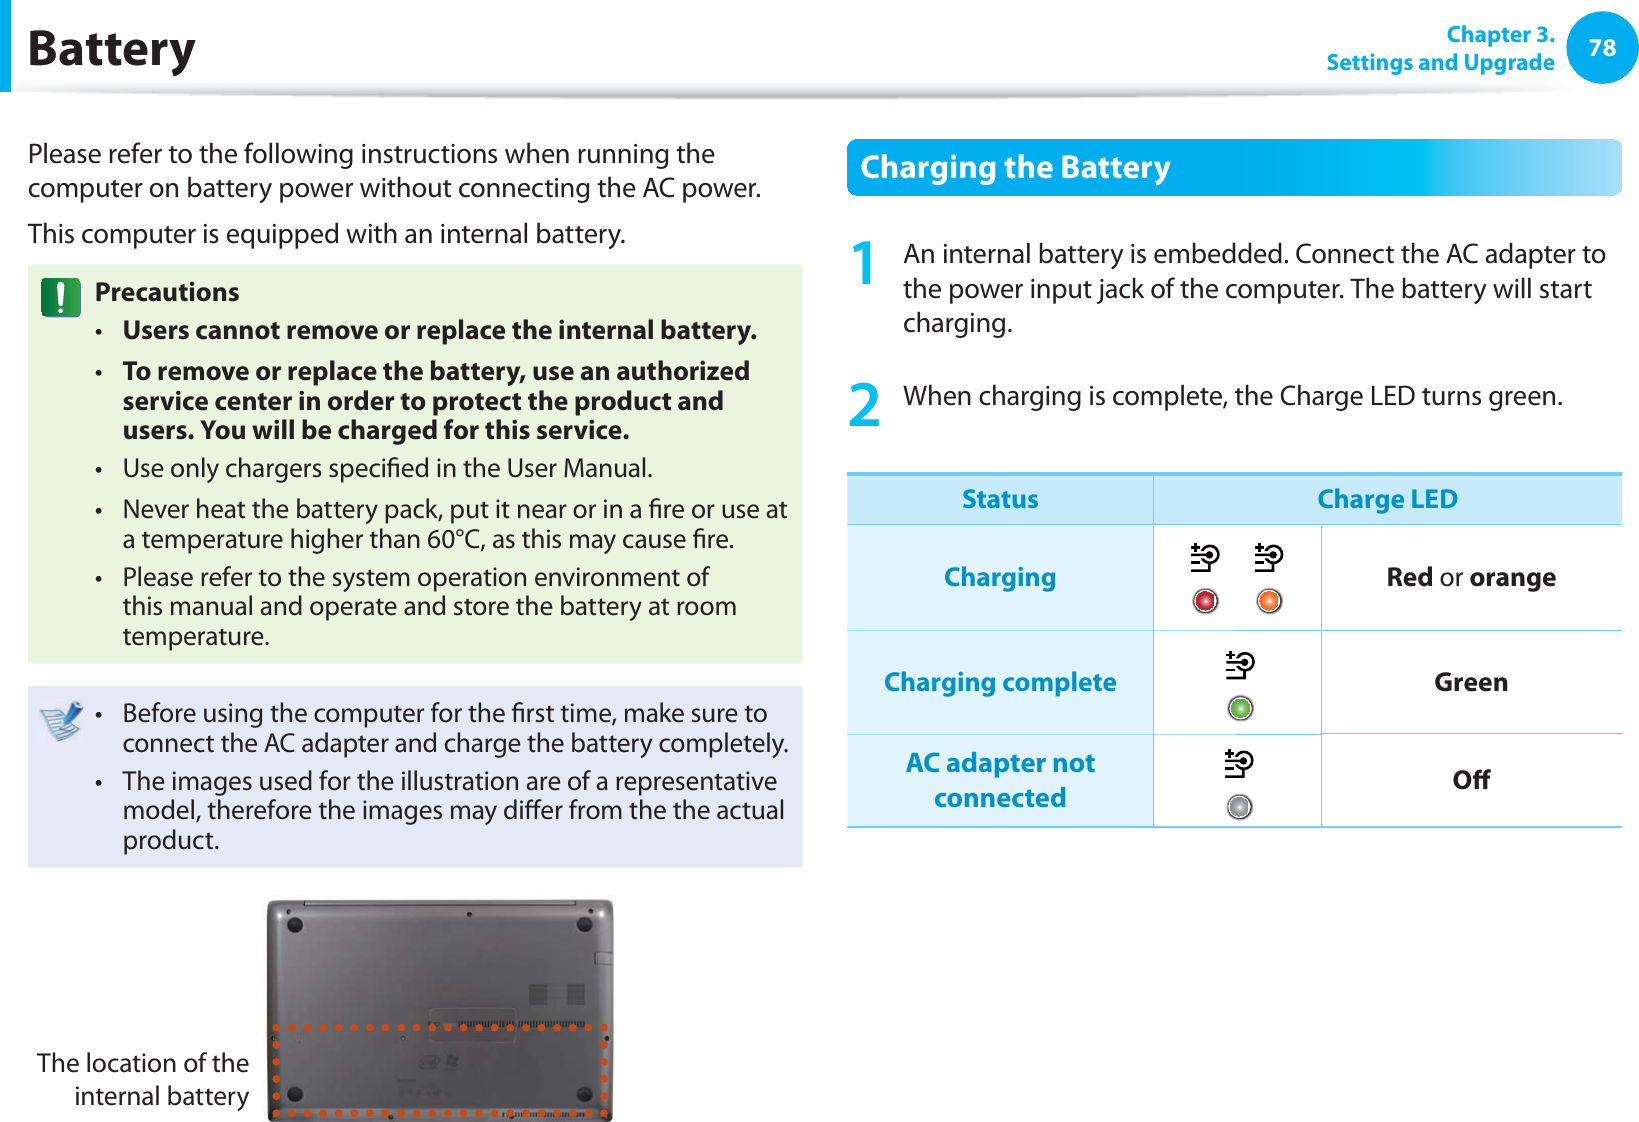 78 Chapter  3.Settings and Upgrade BatteryPlease refer to the following instructions when running the computer on battery power without connecting the AC power. This computer is equipped with an internal battery. PrecautionsUsers cannot remove or replace the internal battery. t To remove or replace the battery, use an authorized t service center in order to protect the product and users. You will be charged for this service.Use only chargers speci ed in the User Manual.t Never heat the battery pack, put it near or in a  re or use at t a temperature higher than 60°C, as this may cause  re.Please refer to the system operation environment of t this manual and operate and store the battery at room temperature.Before using the computer for the  rst time, make sure to t connect the AC adapter and charge the battery completely.The images used for the illustration are of a representative t model, therefore the images may di er from the the actual product.The location of the internal battery Charging the Battery1  An internal battery is embedded. Connect the AC adapter to the power input jack of the computer. The battery will start charging.2  When charging is complete, the Charge LED turns green.Status Charge LEDCharging Red or orangeCharging complete GreenAC adapter not connected O 